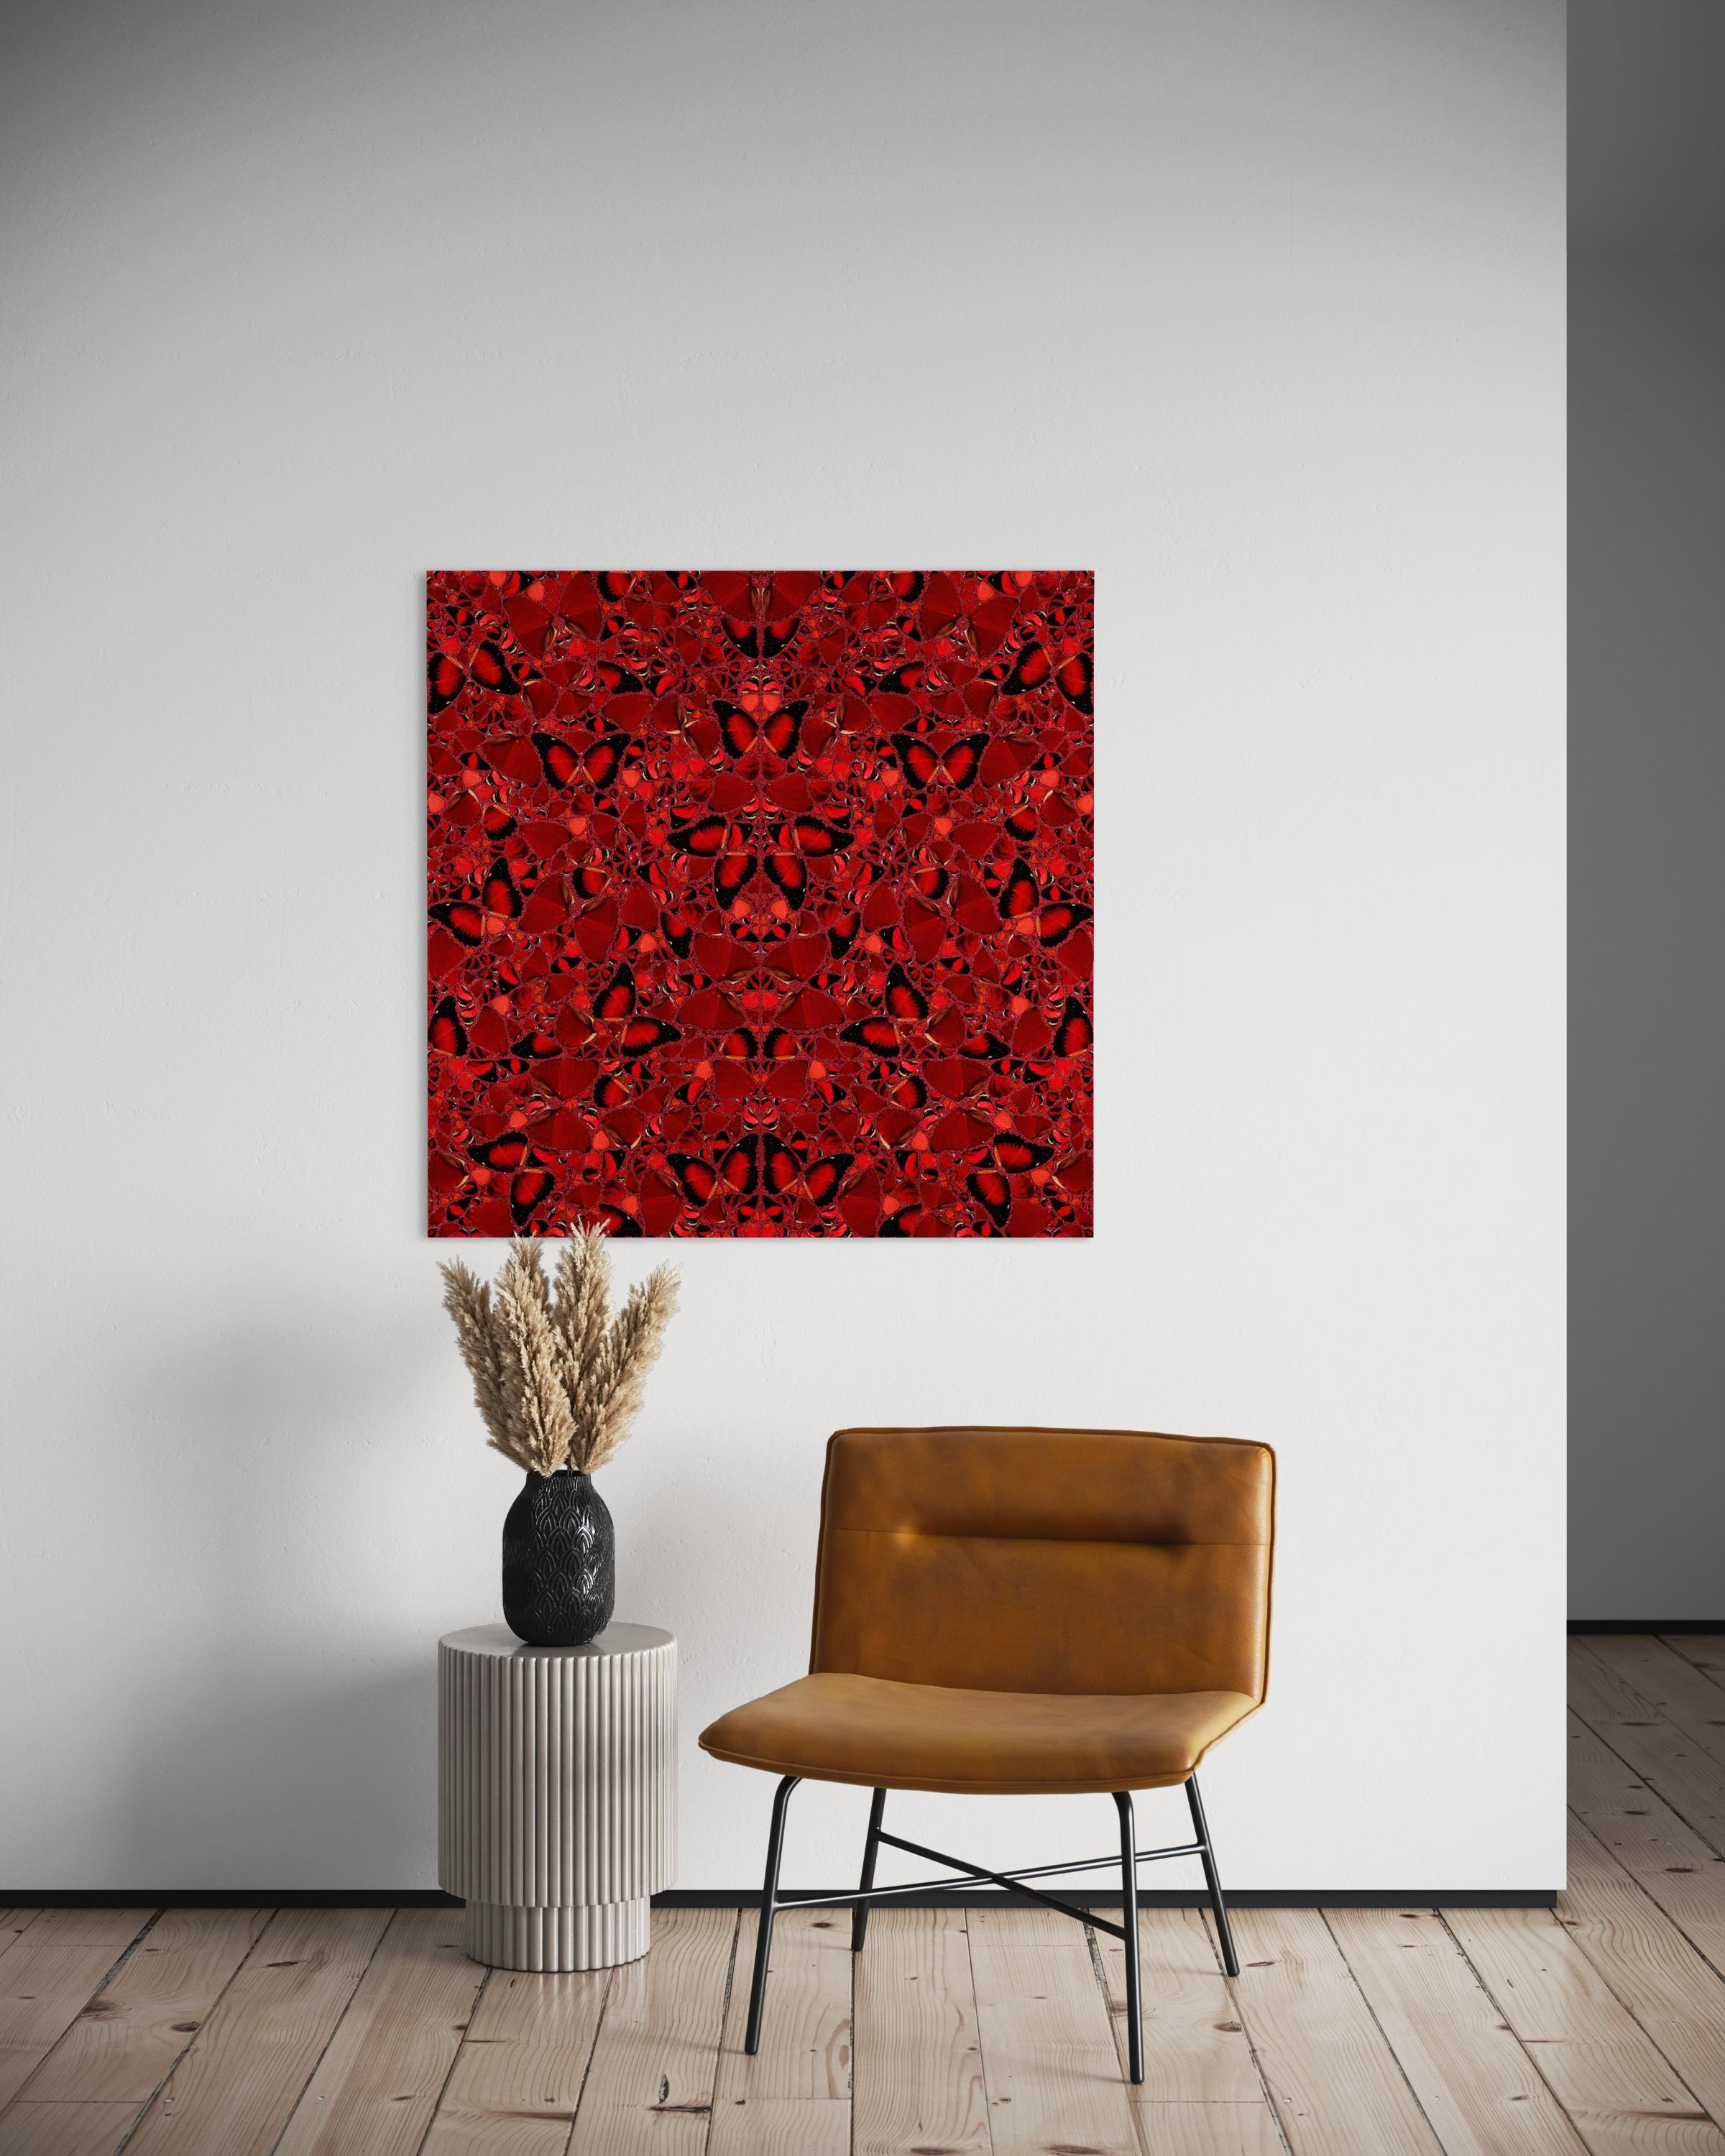 H10-3 Theodora - Red Abstract Print by Damien Hirst